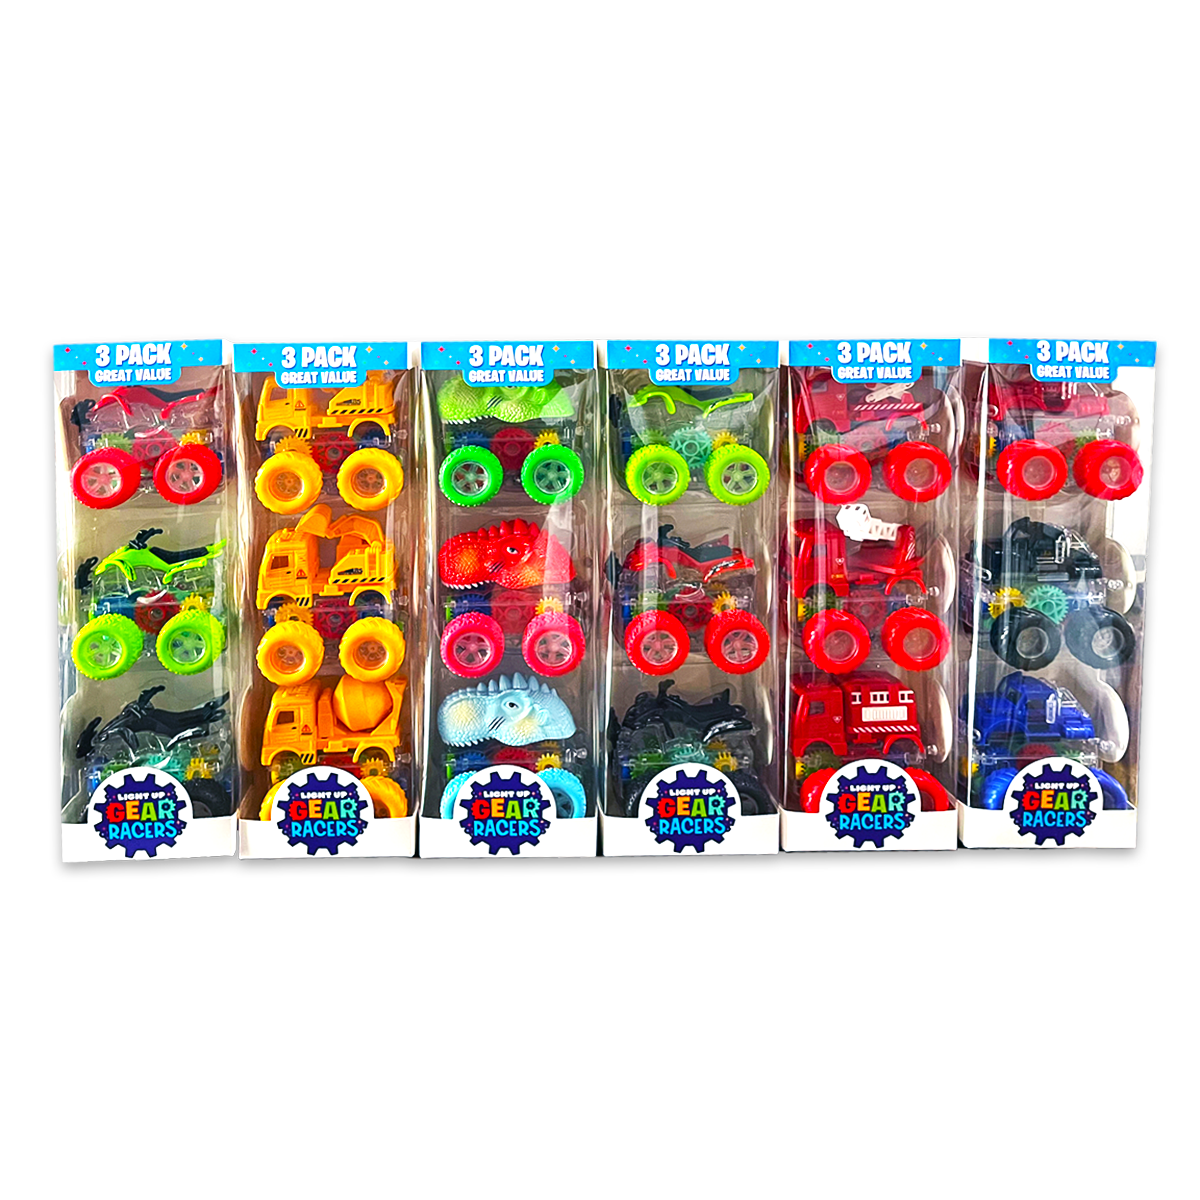 3-PACK LIGHT UP GEAR RACERS TOY CARS